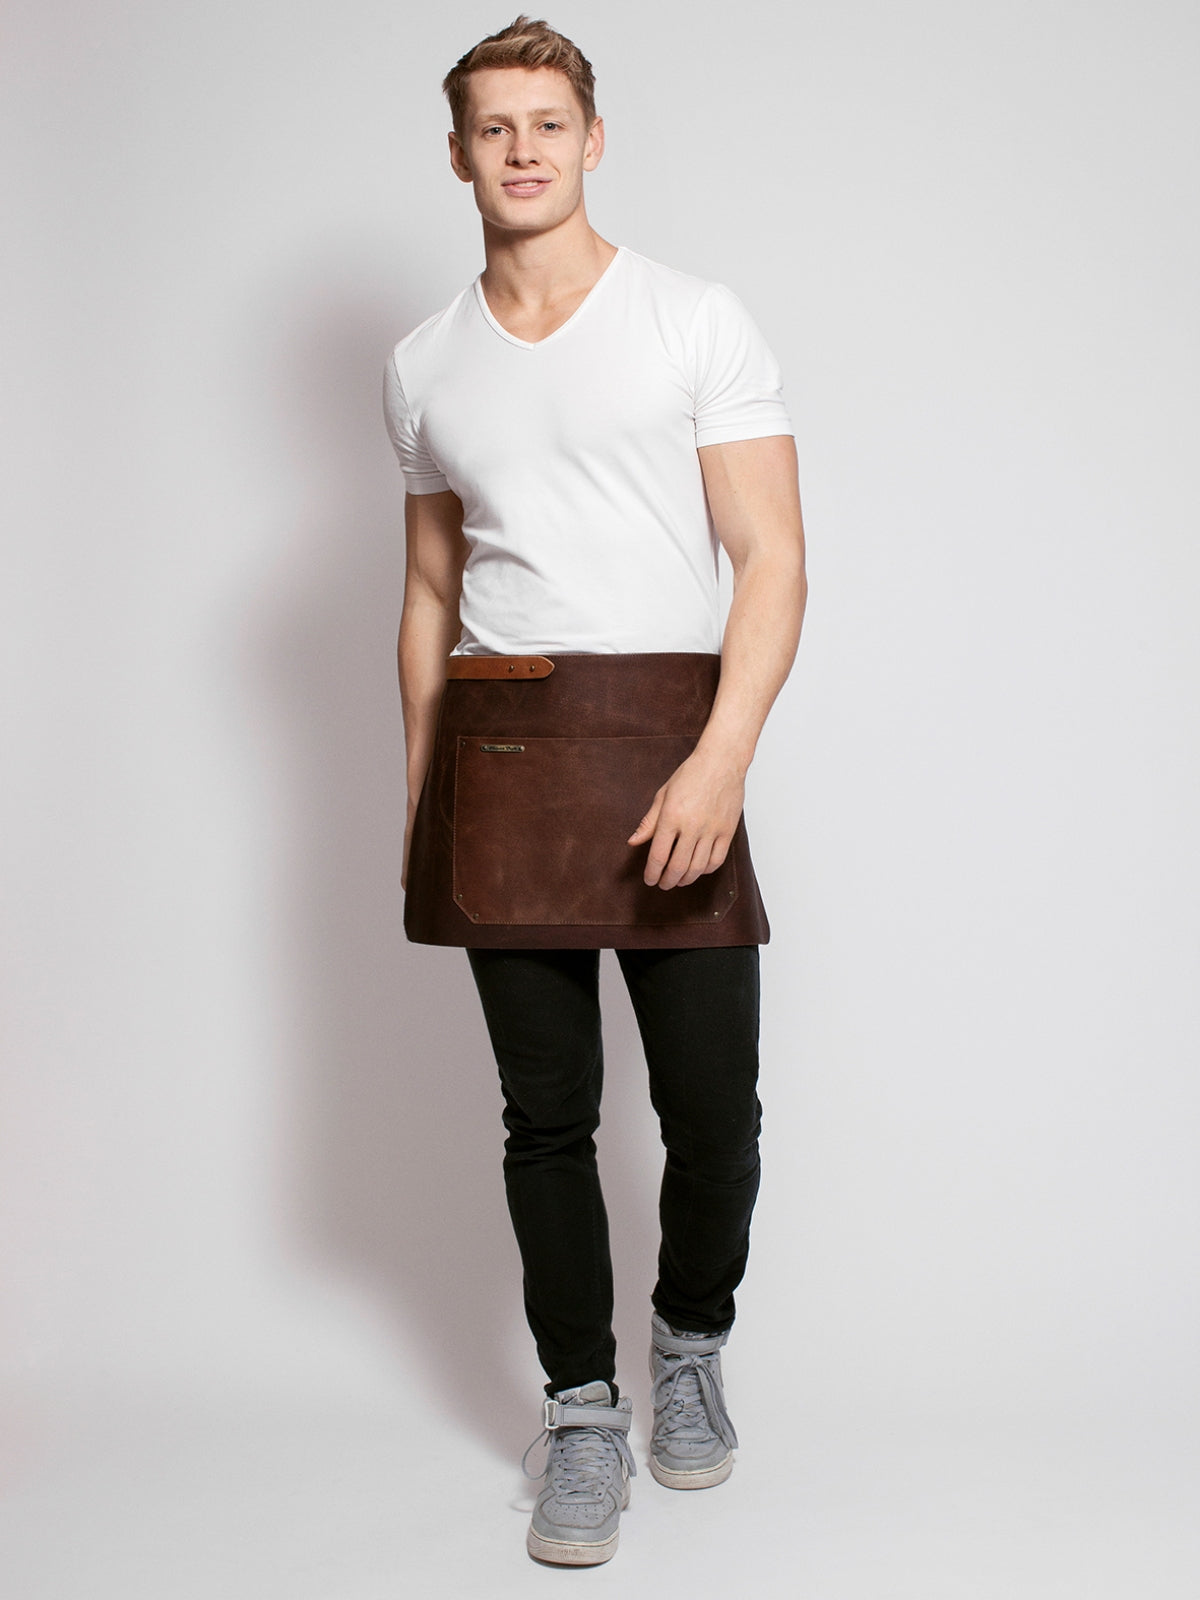 Leather Waist Apron Rustic Brown by Stalwart -  ChefsCotton